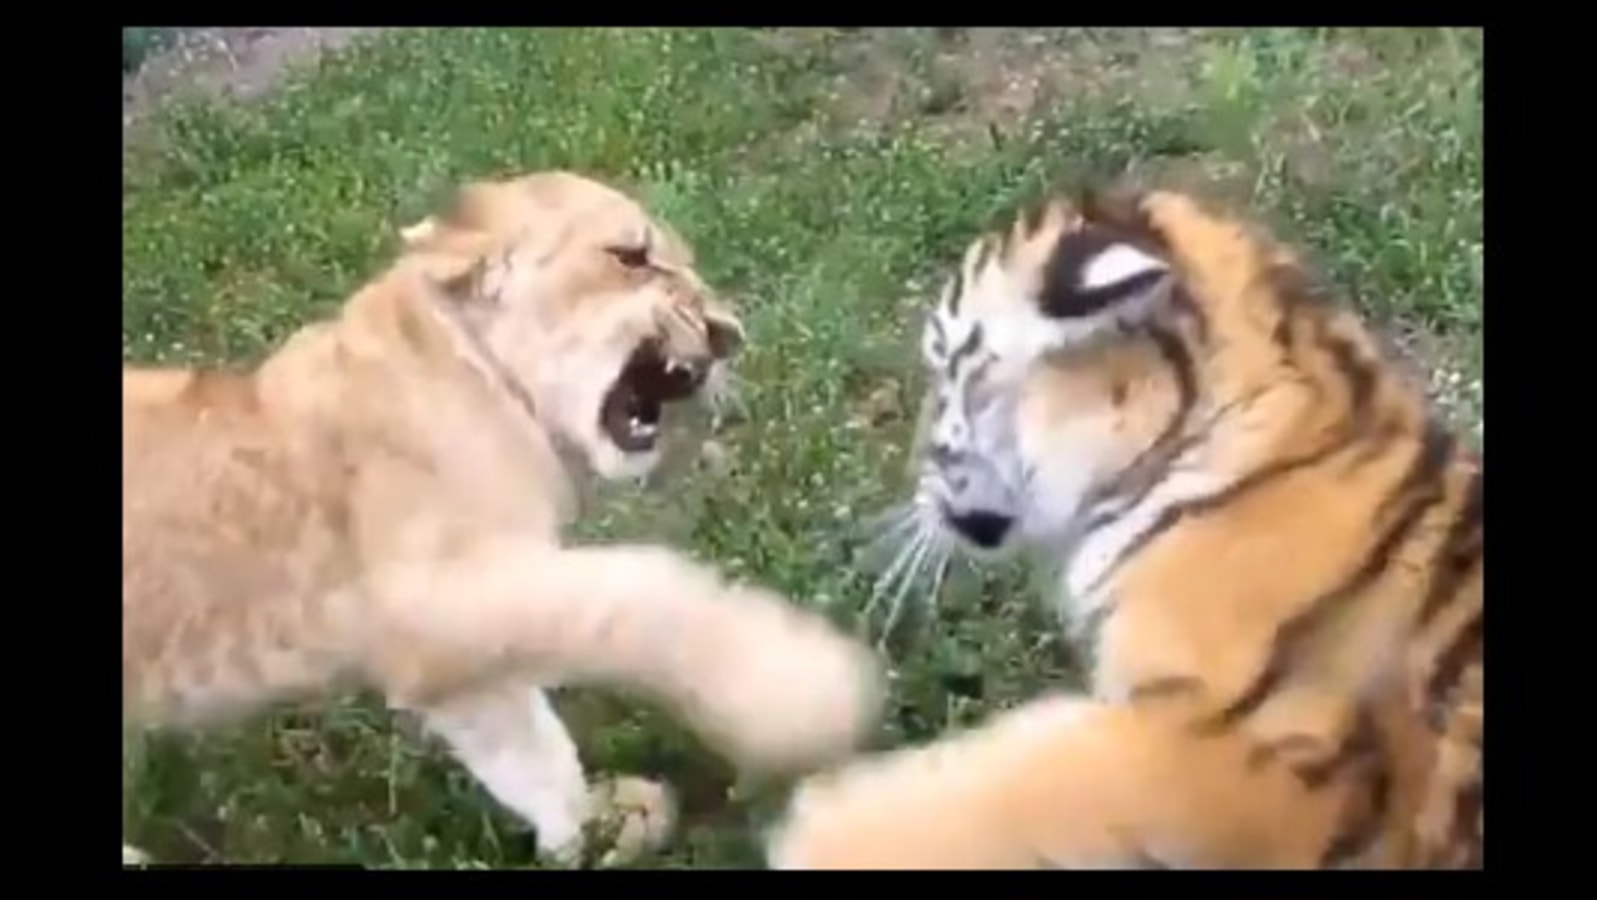 Tiger cub 'fiercely' fights with lion cub, end up melting tweeple's hearts